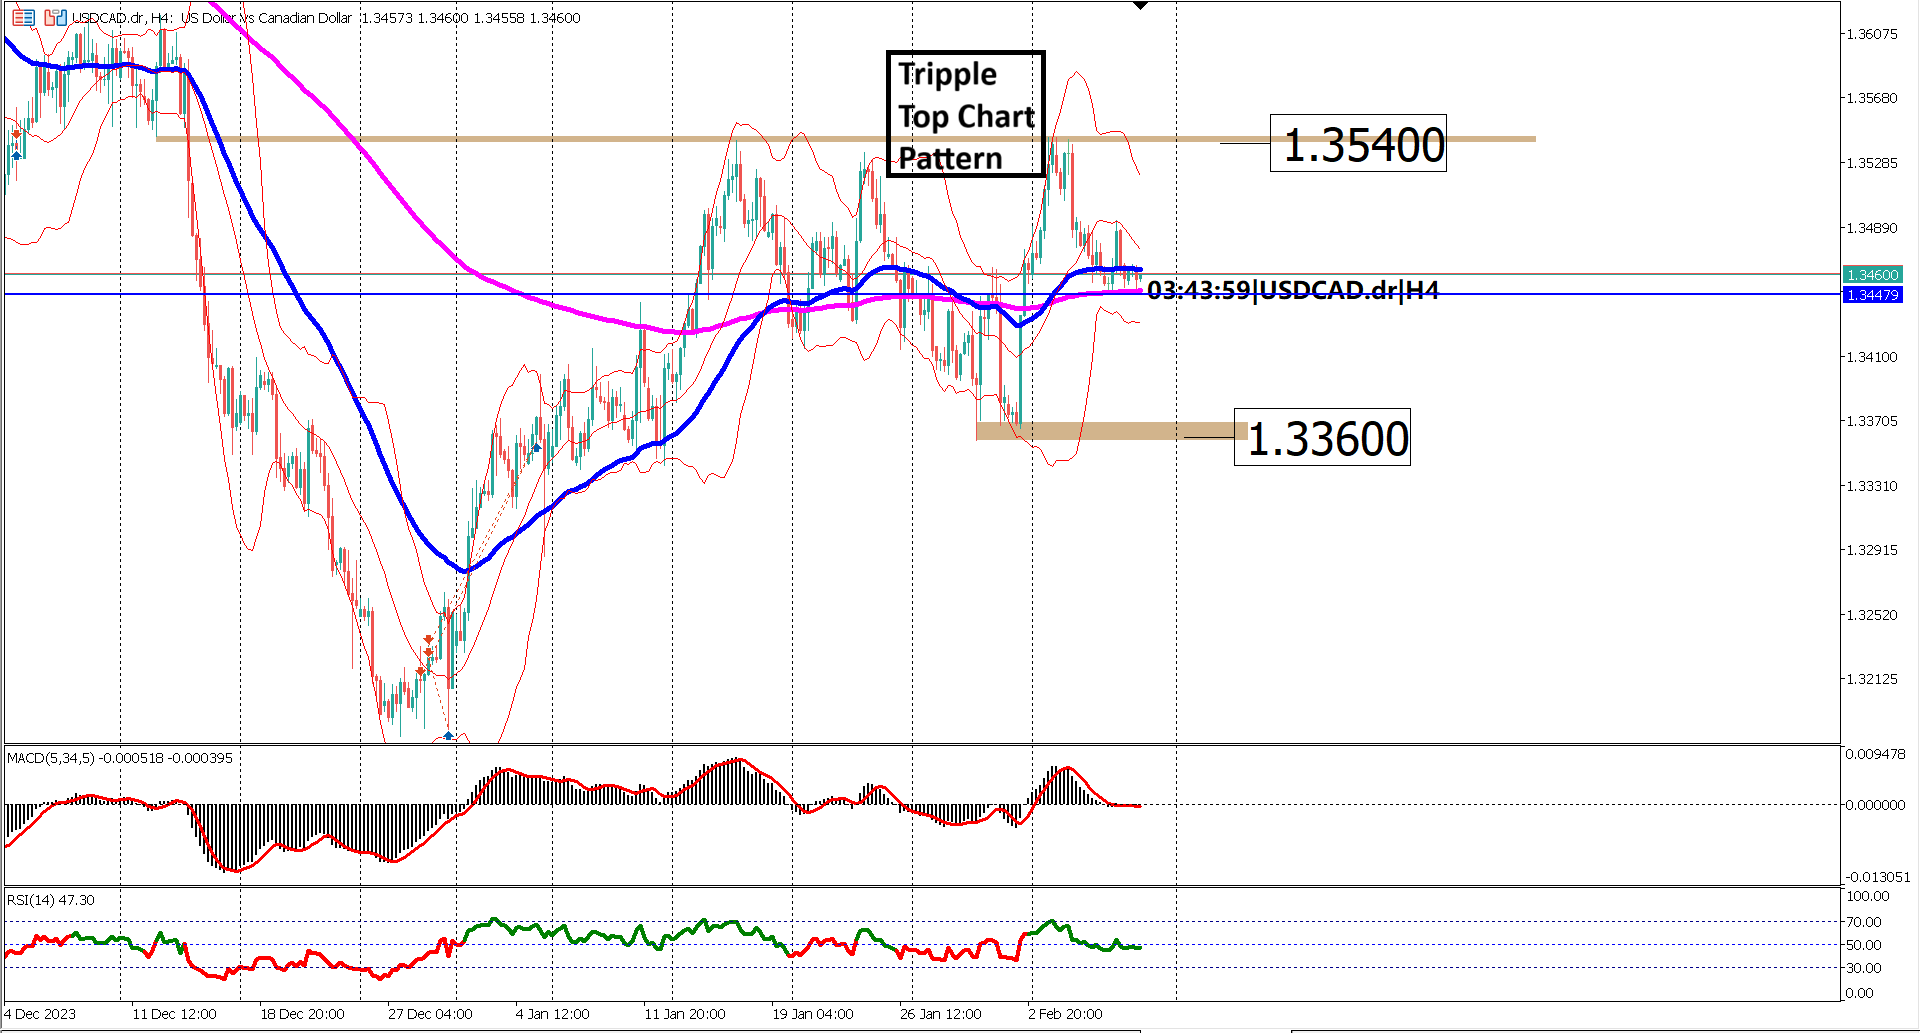 Latest Update: USDCAD's Sideways Movement and Triple Top Pattern - Insights Here!